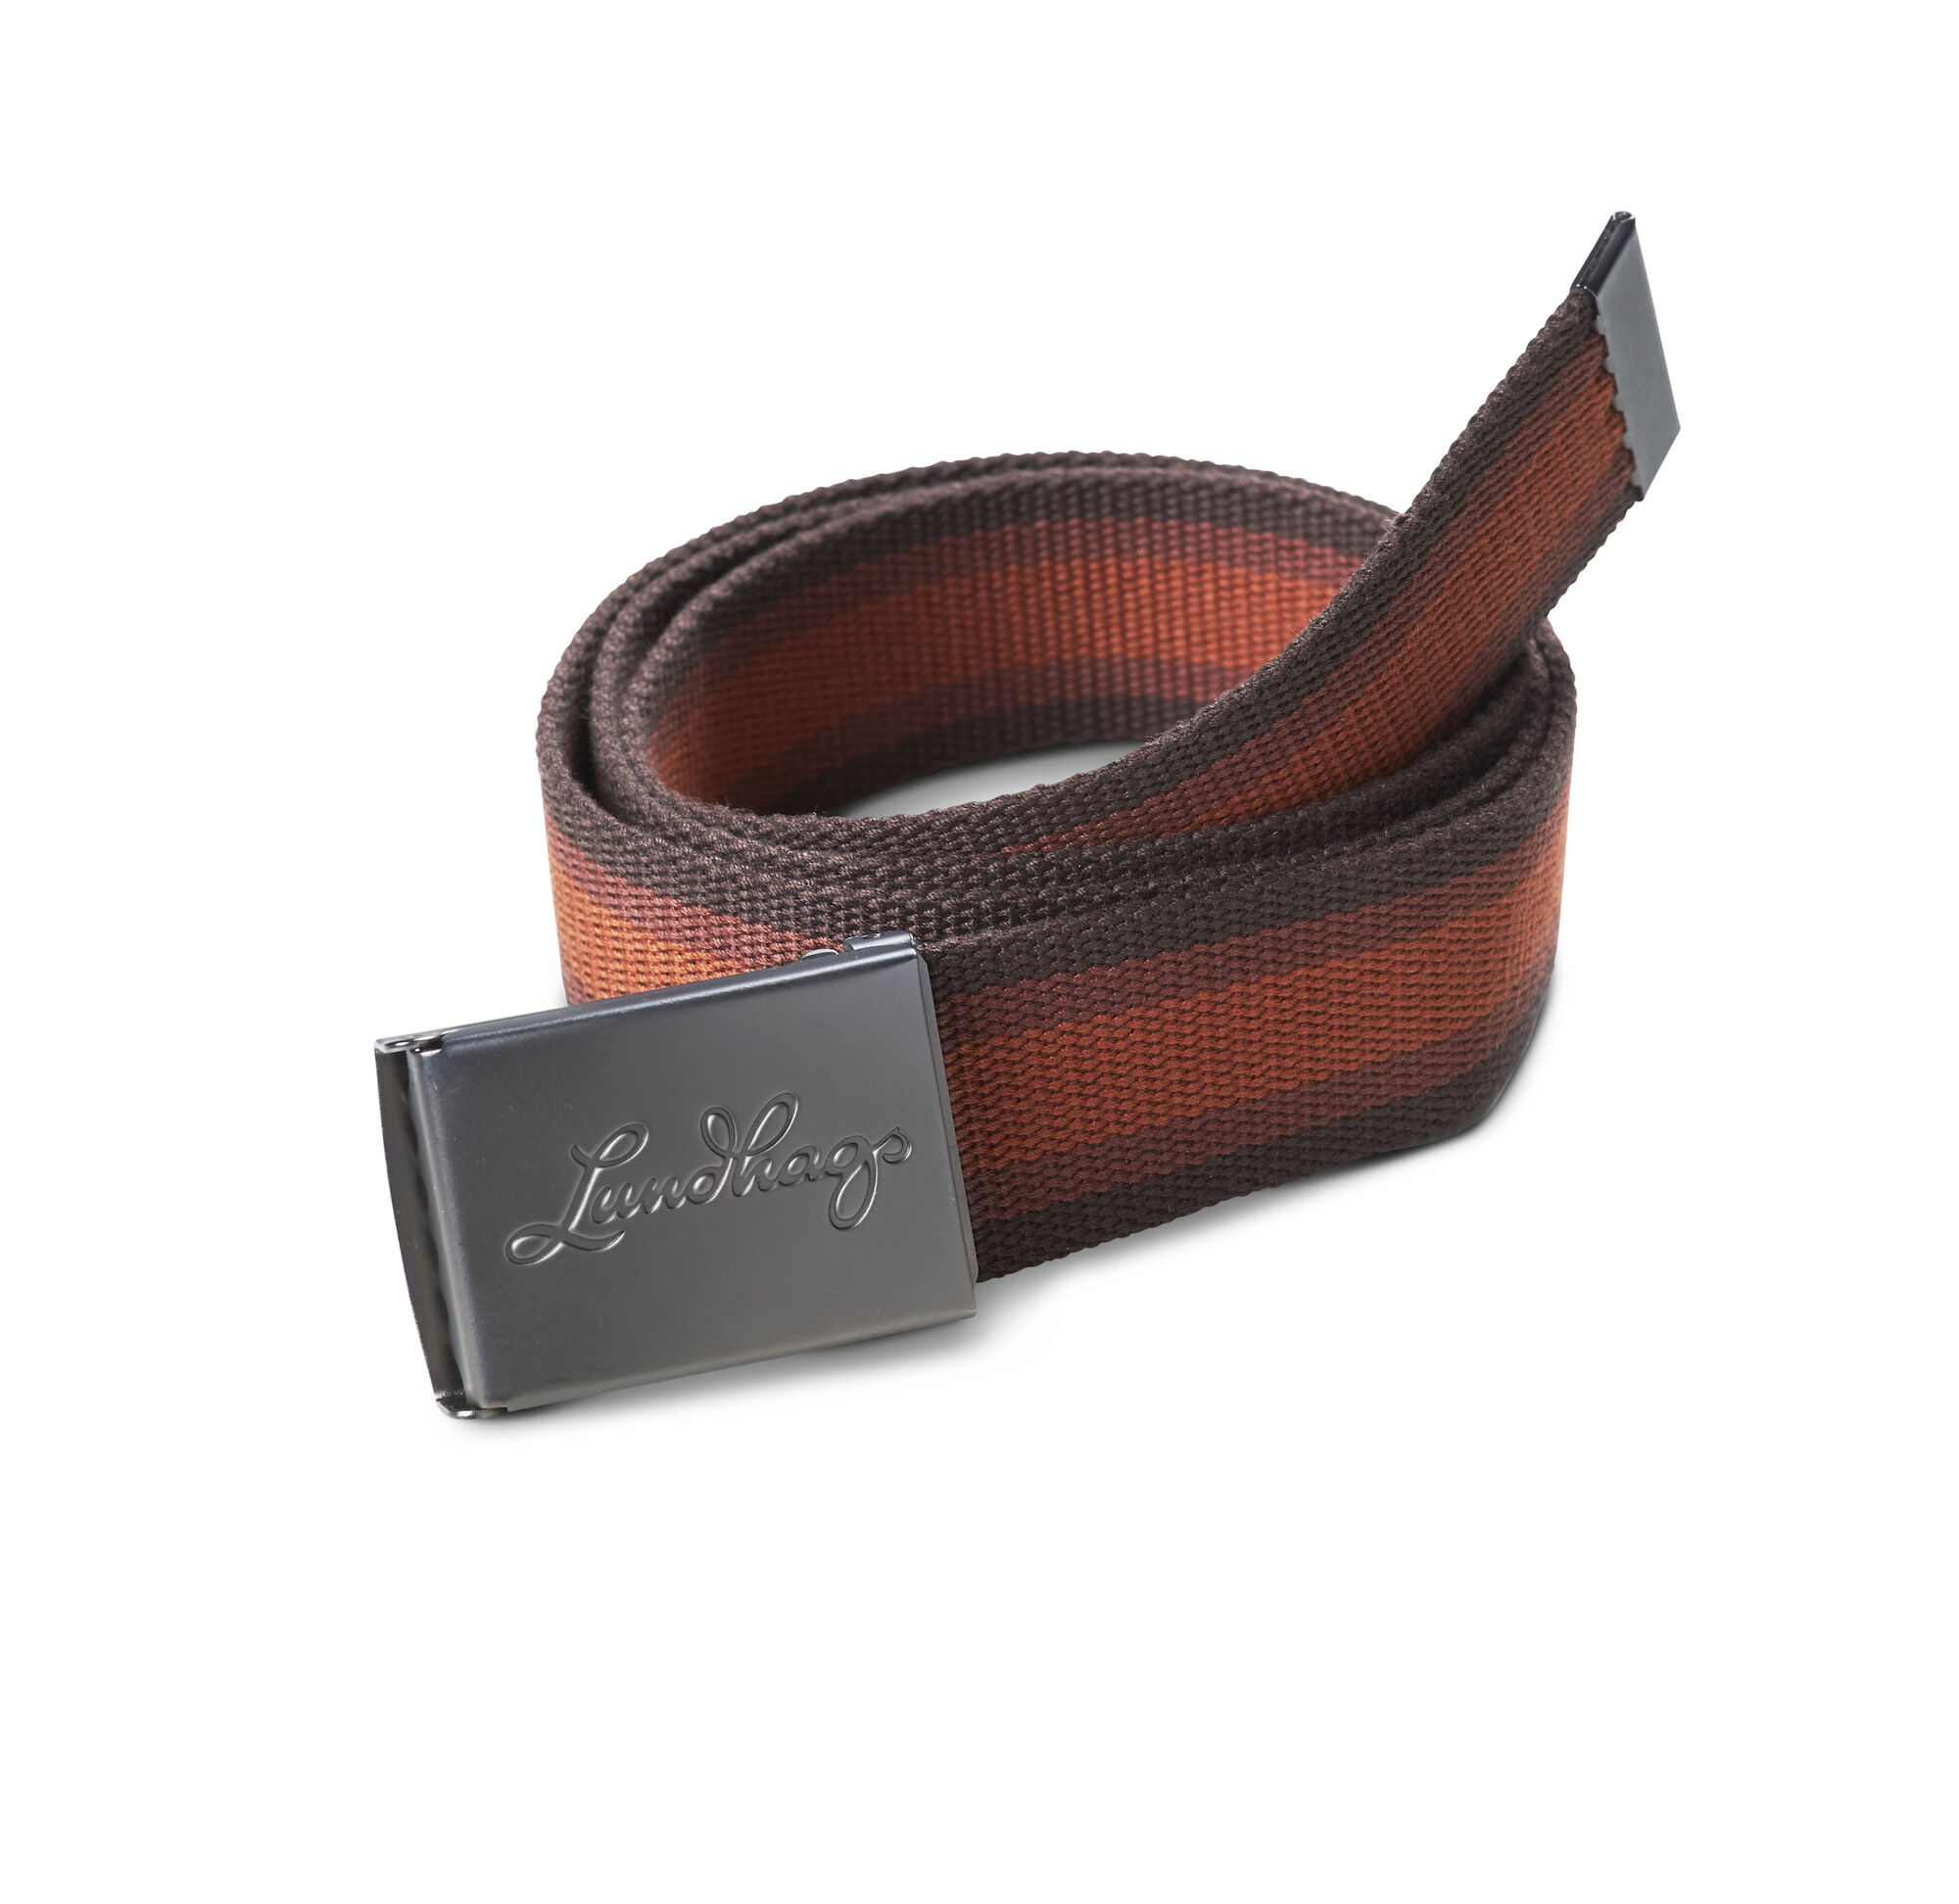 Lundhags Buckle Belt Amber